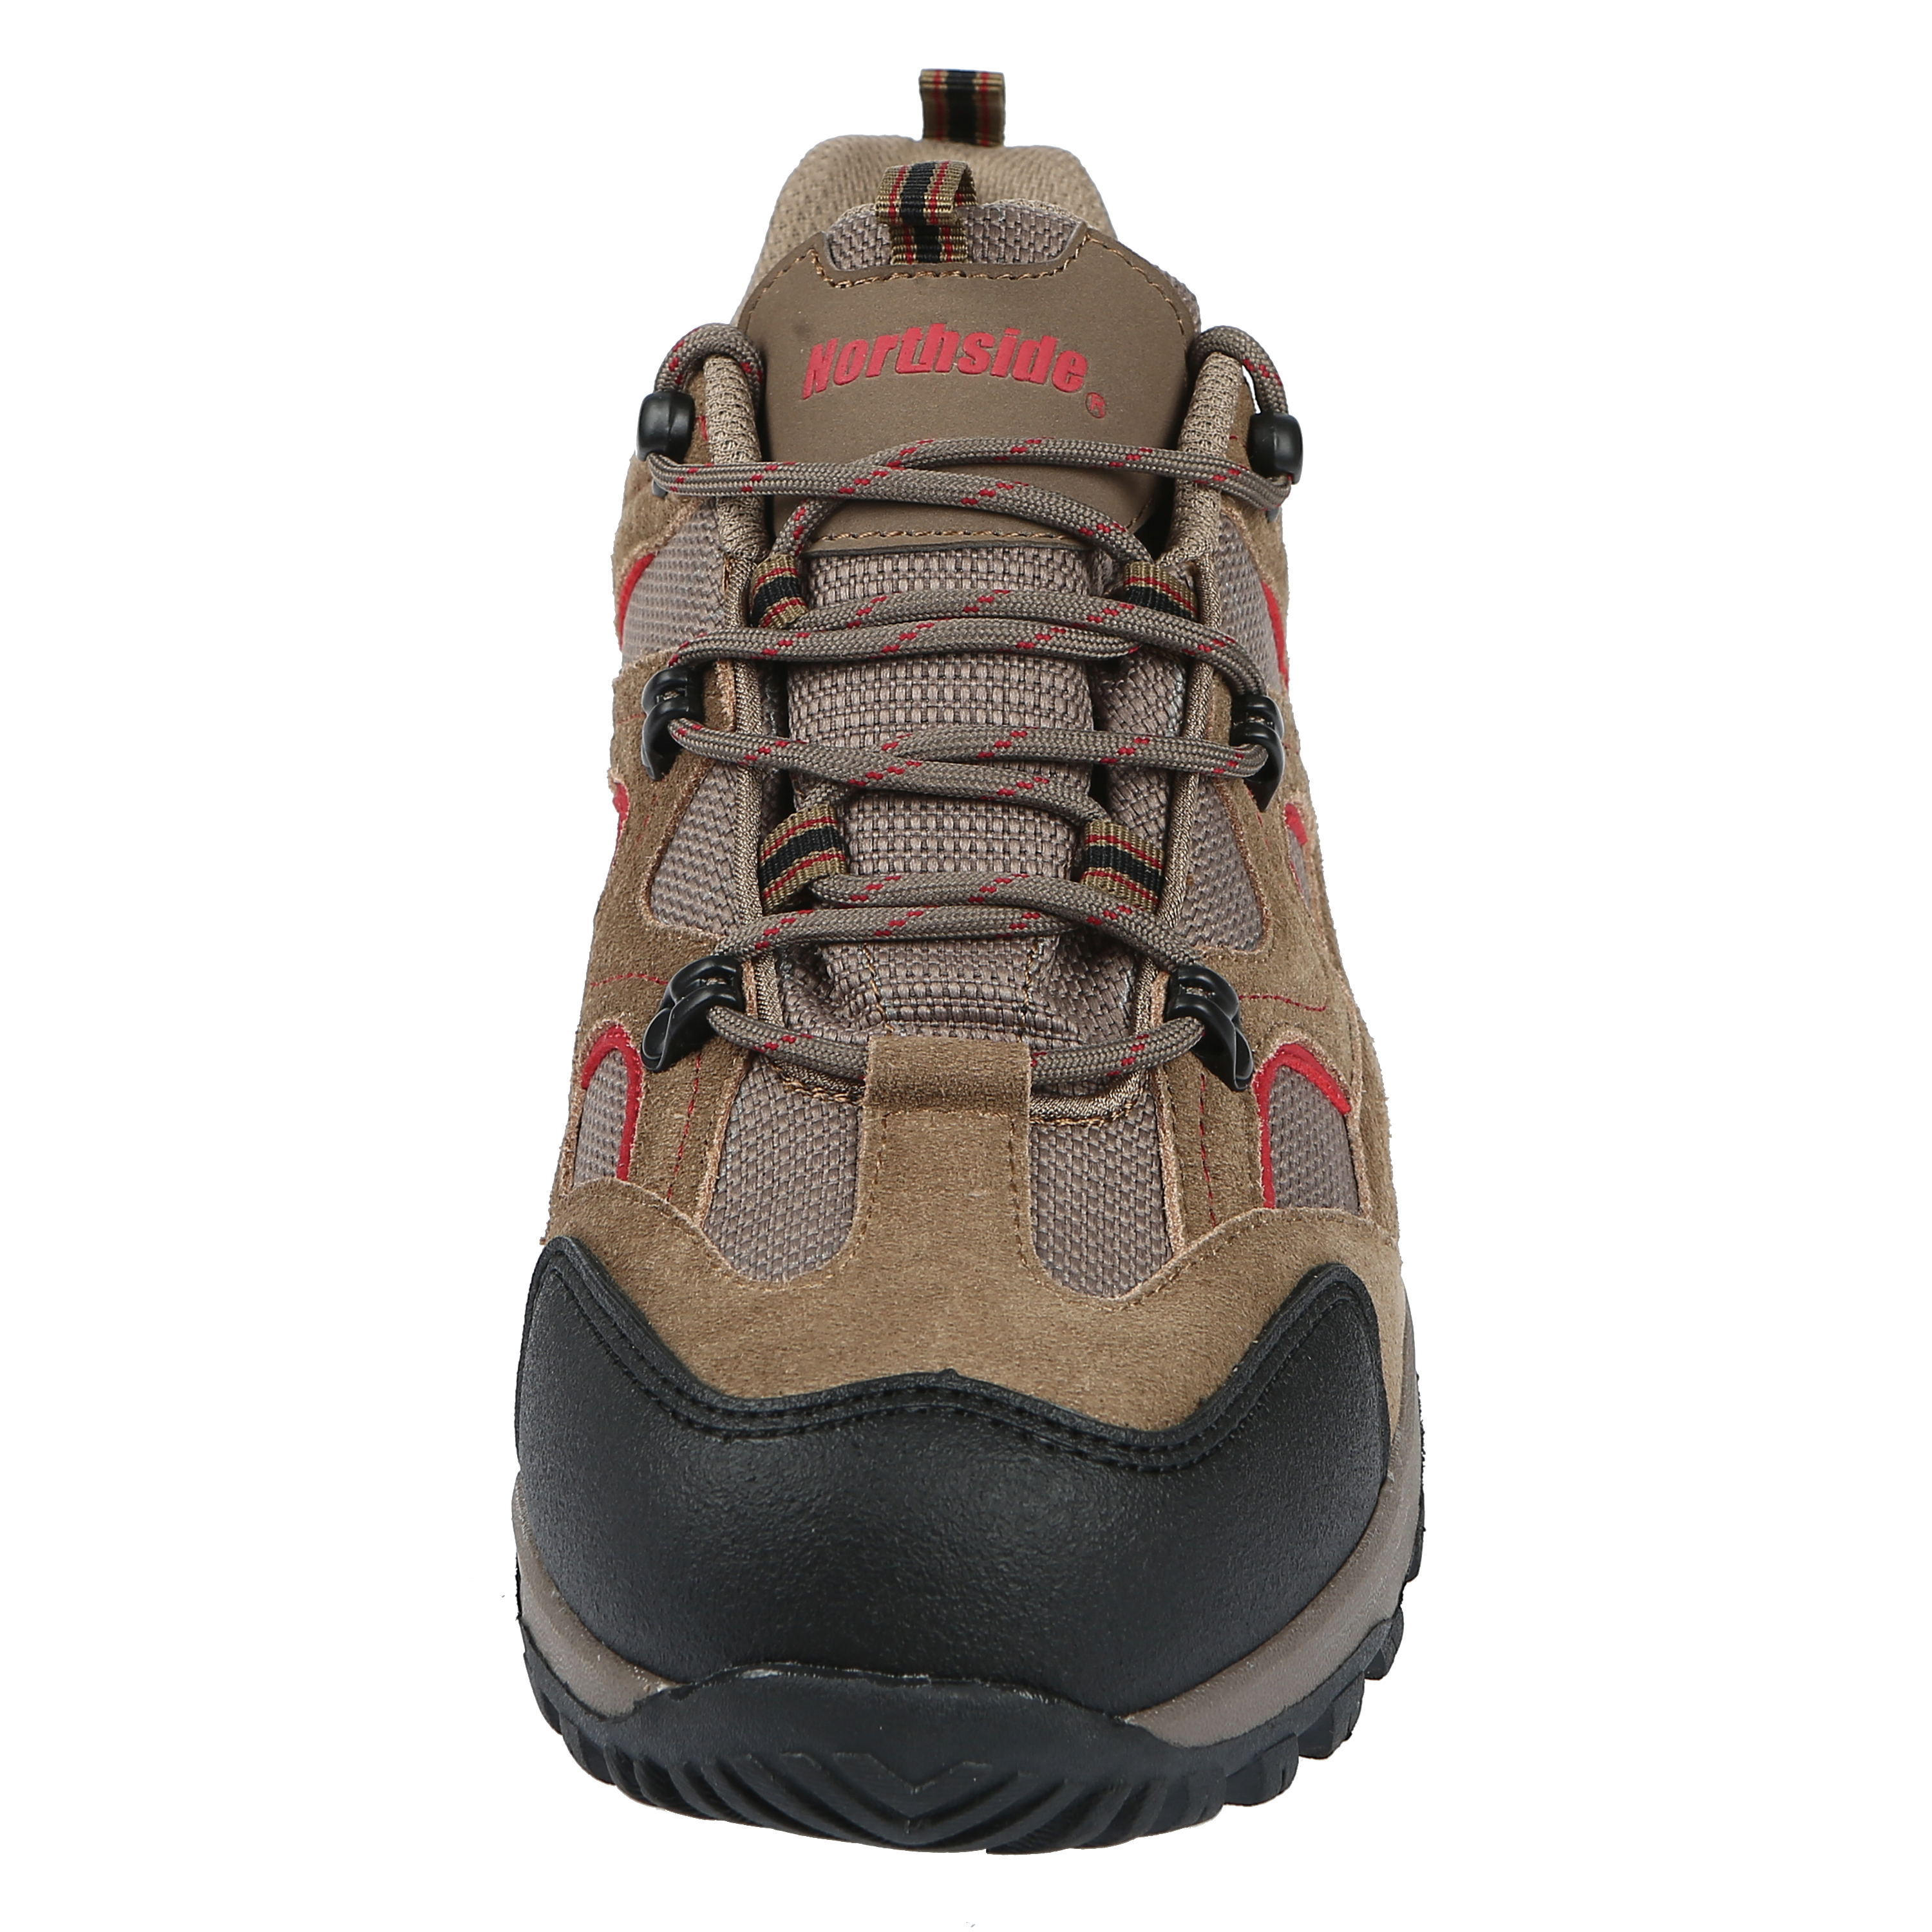 Northside Men's Snohomish Leather Water Resistant Hiking Shoe (Wide Available) - image 4 of 5